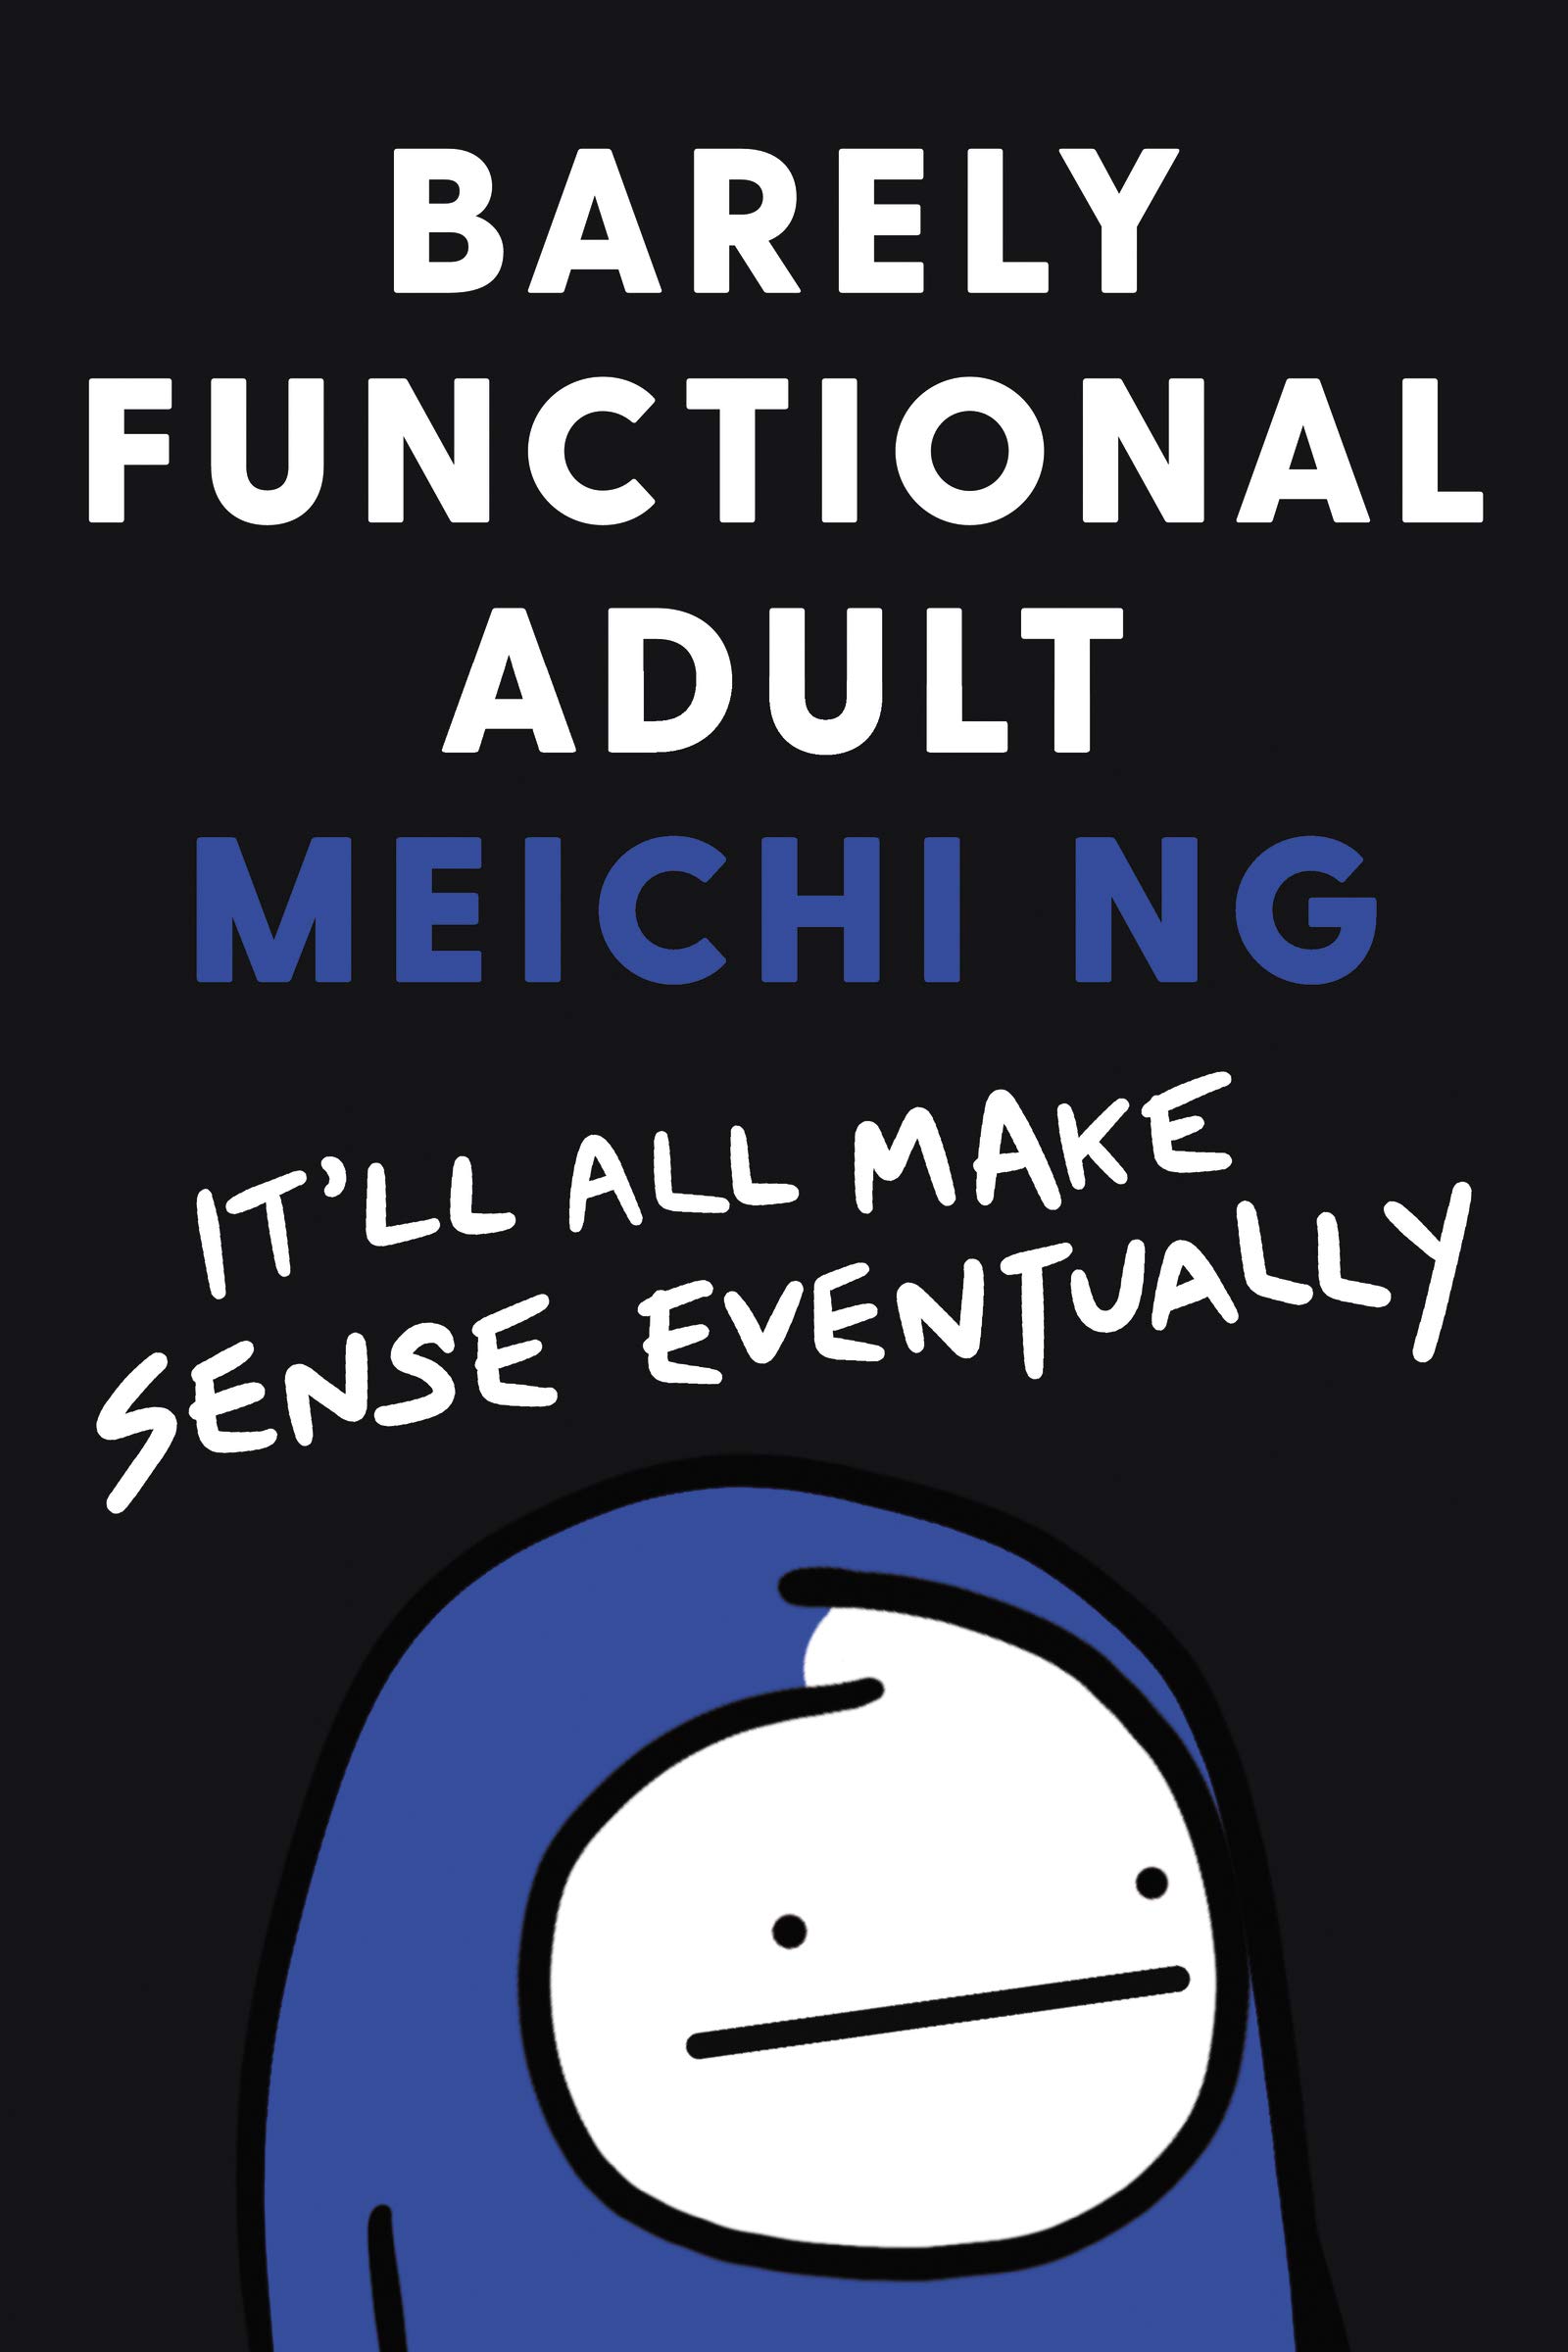 Barely Functional Adult | Meichi Ng